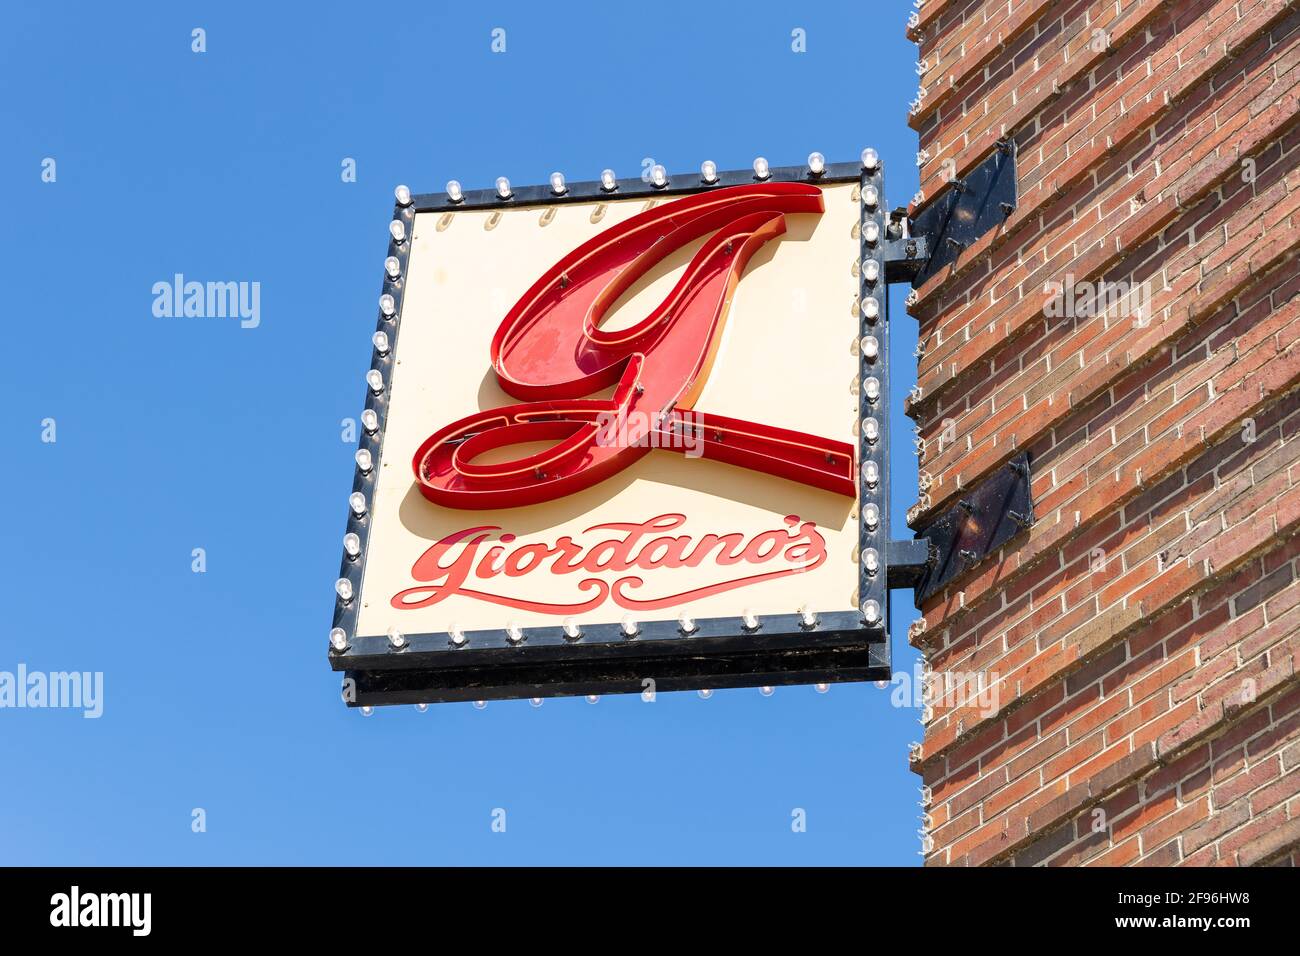 Giordano's is an Italian restaurant that is known for its Chicago deep dish pizza, mostly in Illinois but also in some other states around the USA. Stock Photo